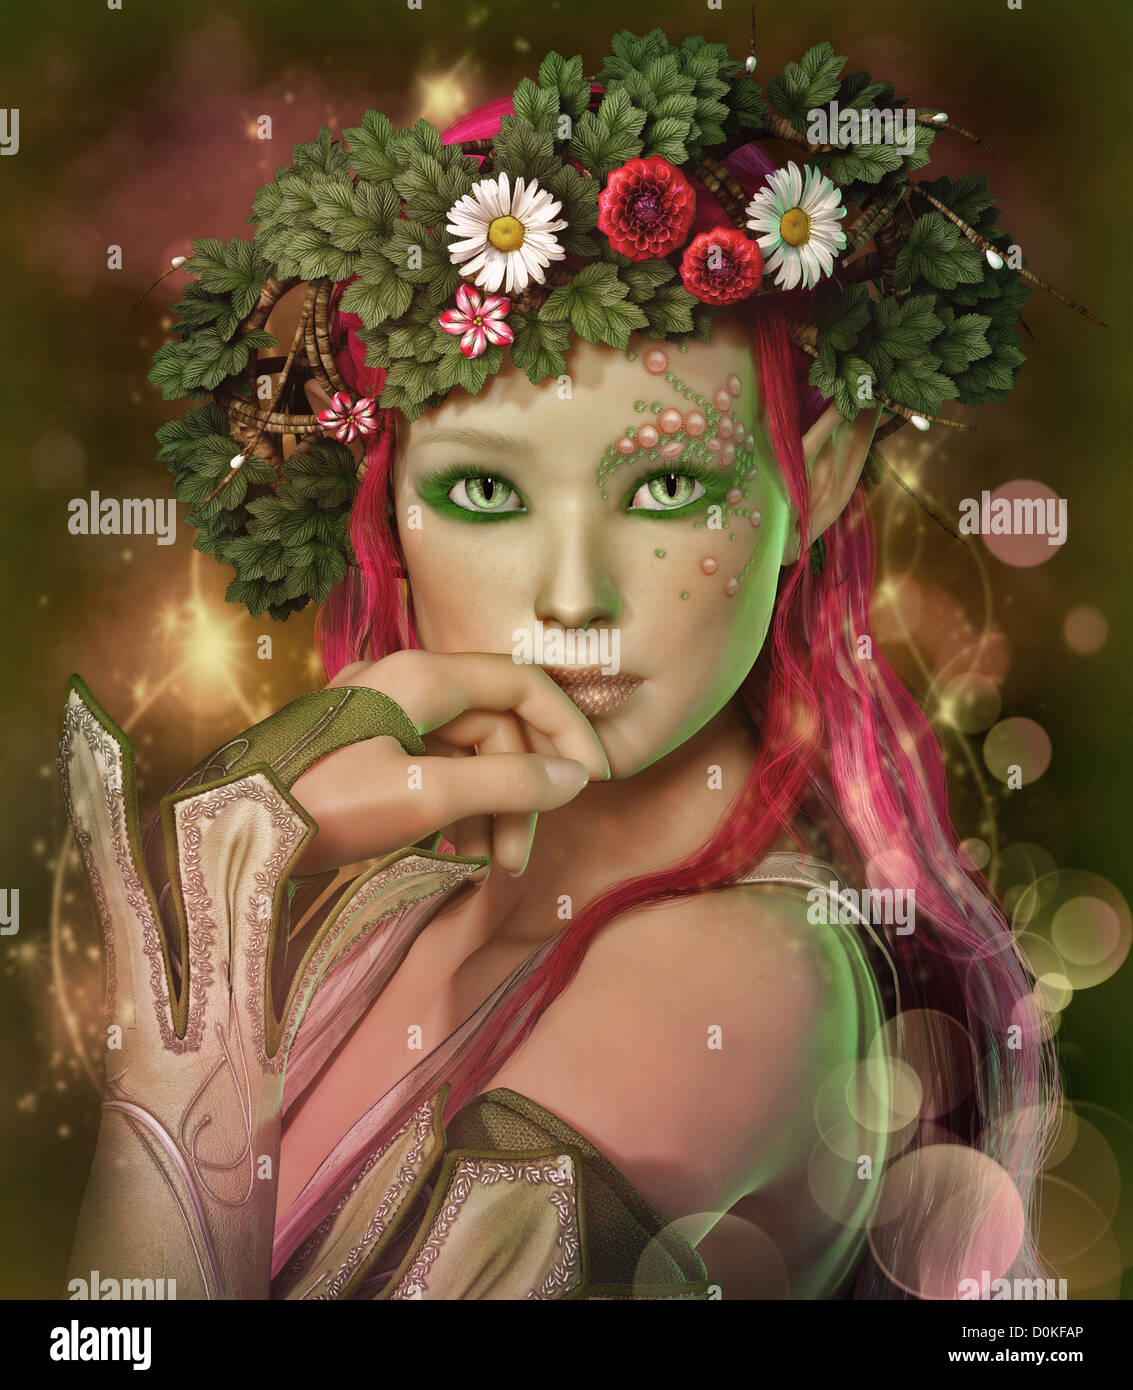 a portrait of an elven maid with a wreath on her head Stock Photo